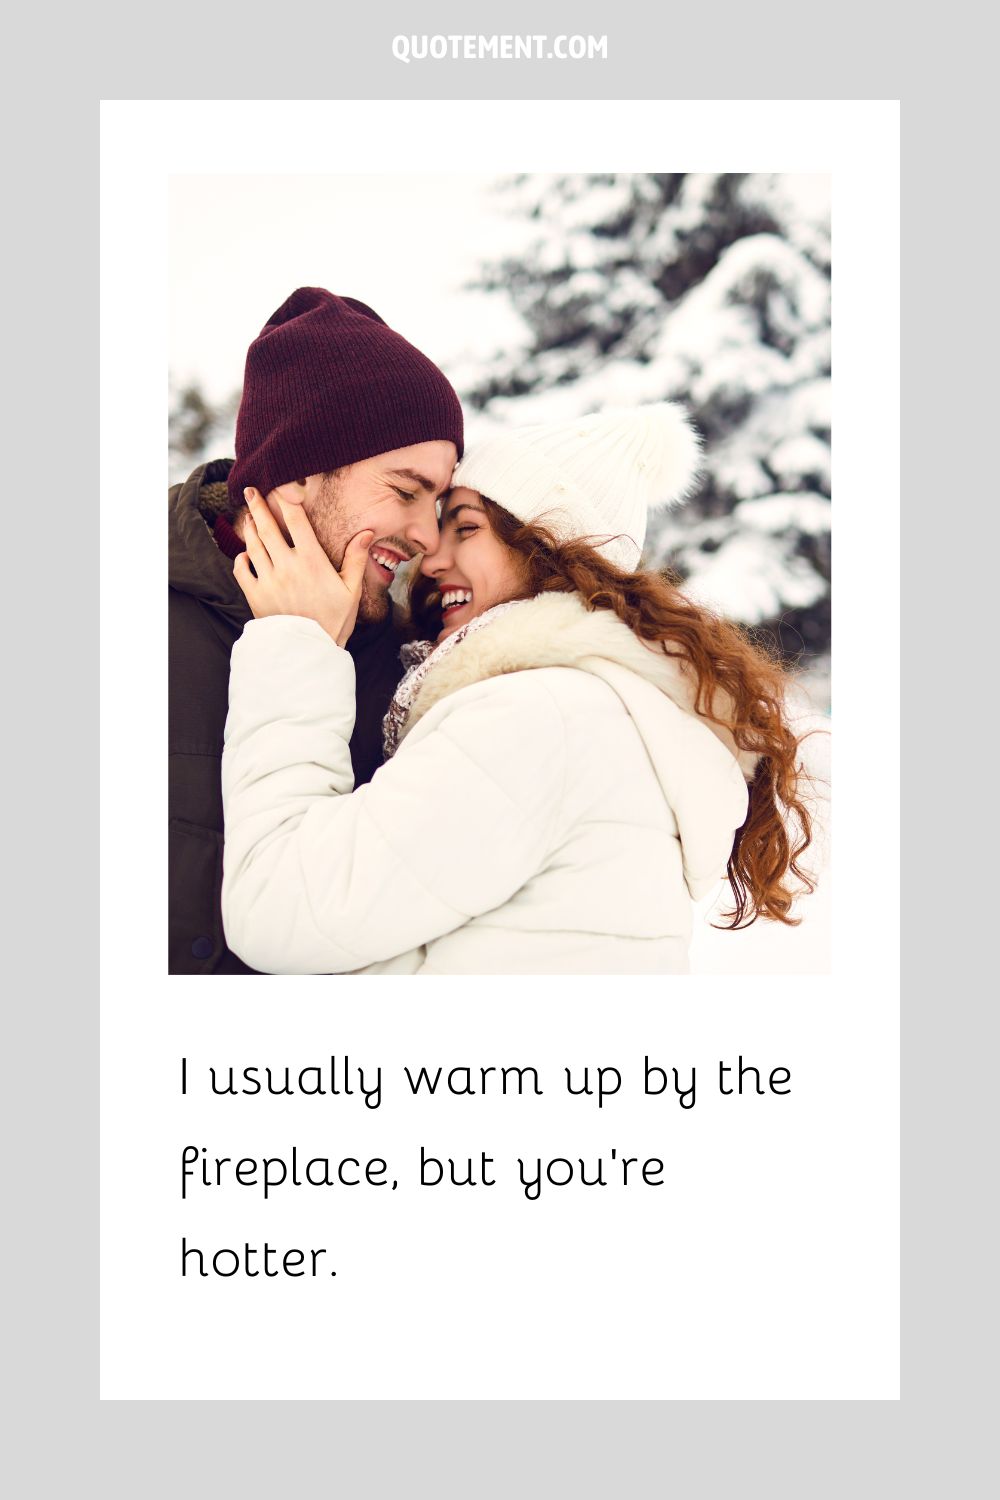 a smiling couple shares a cuddle on a snowy day